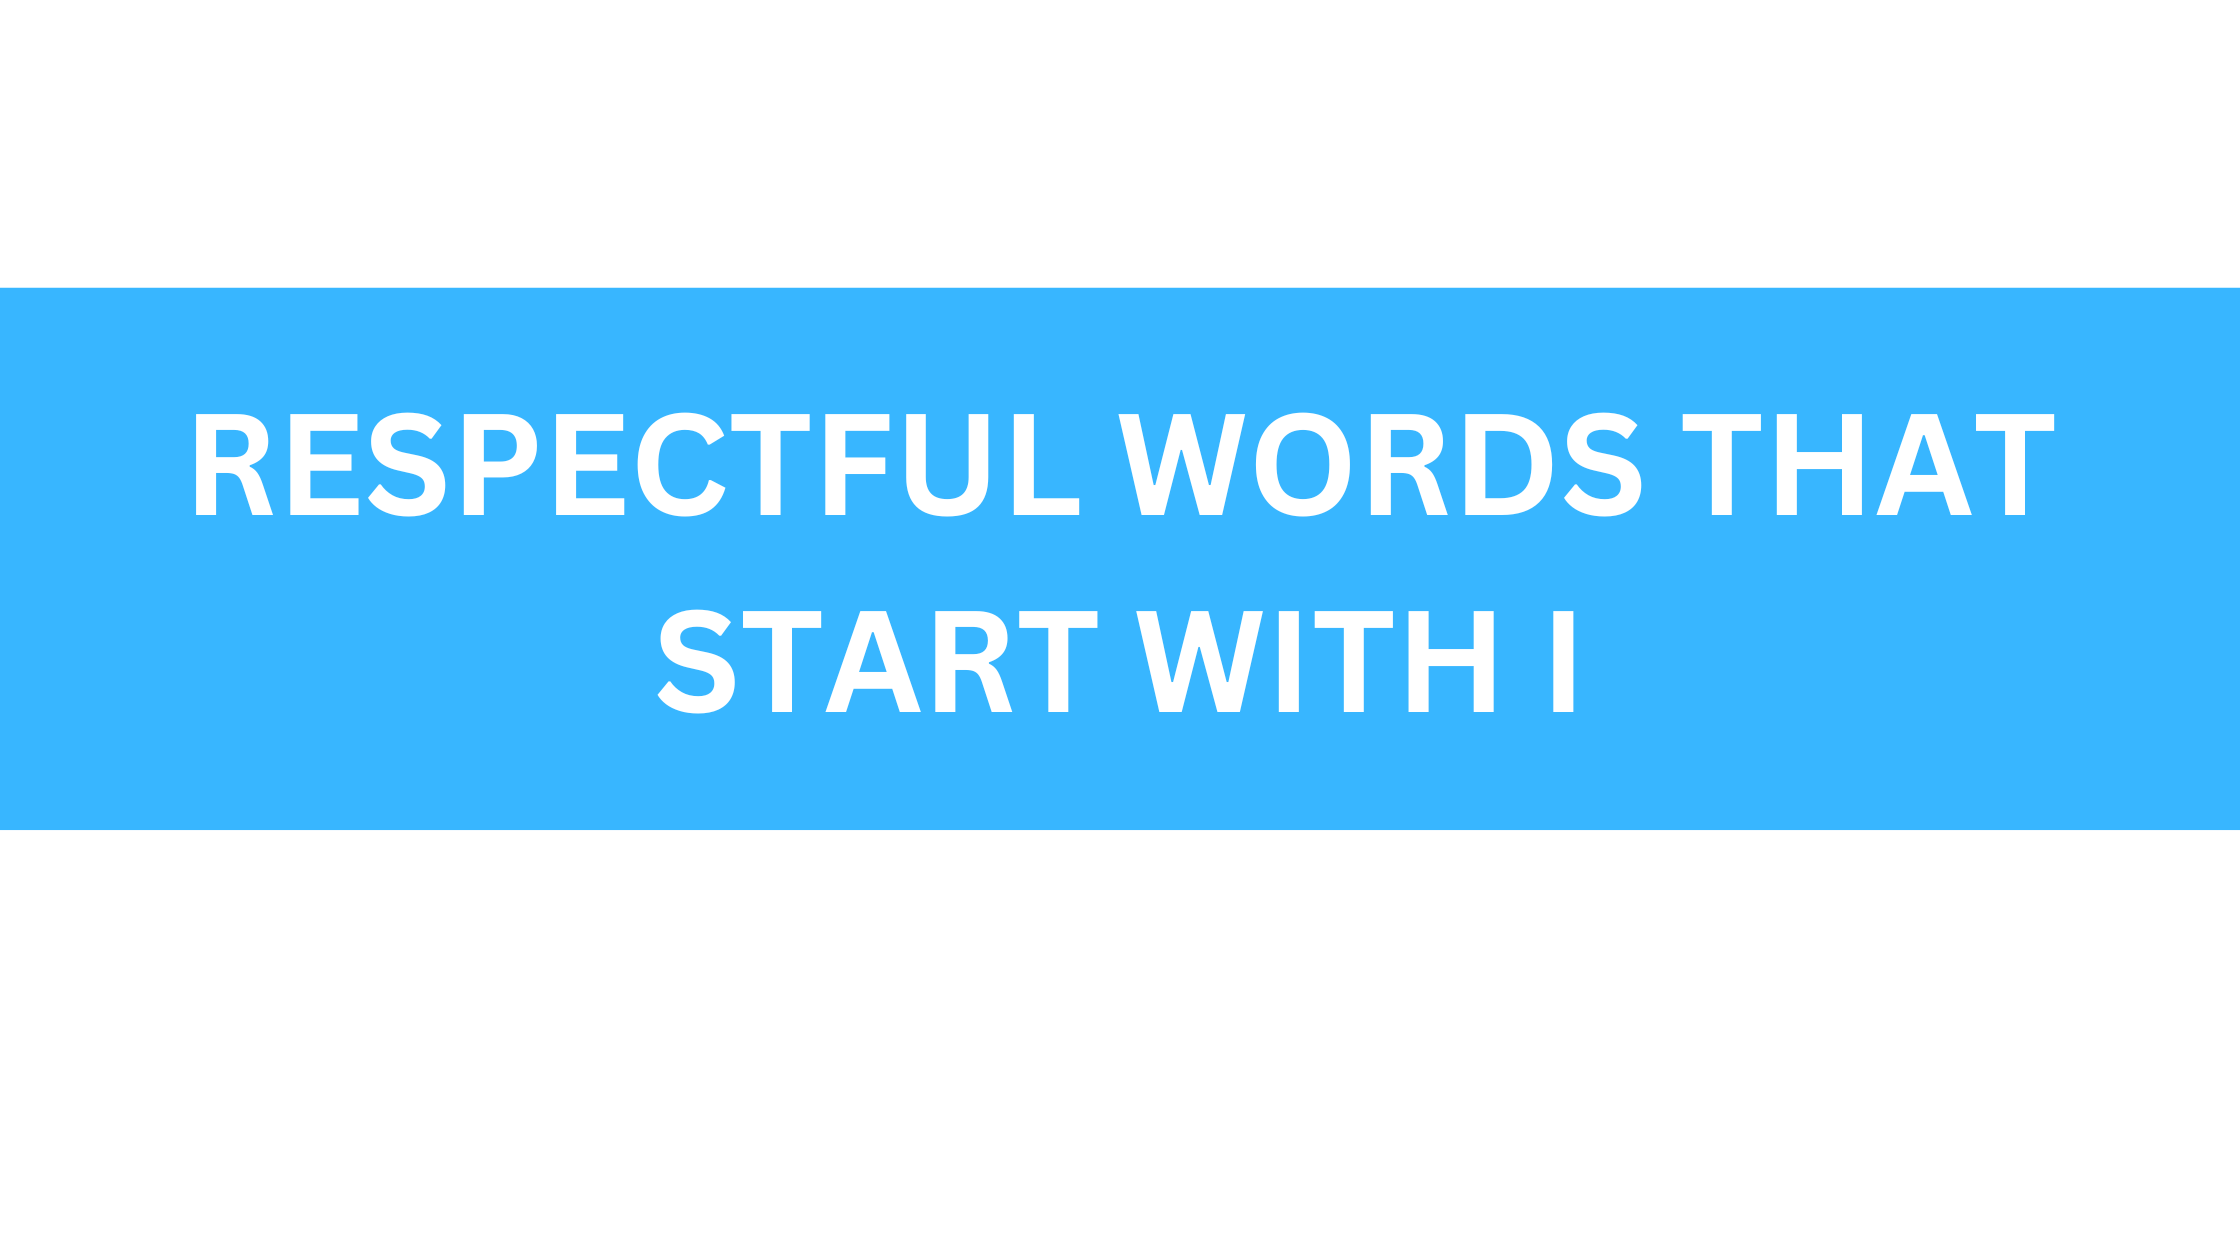 respectful words that start with i